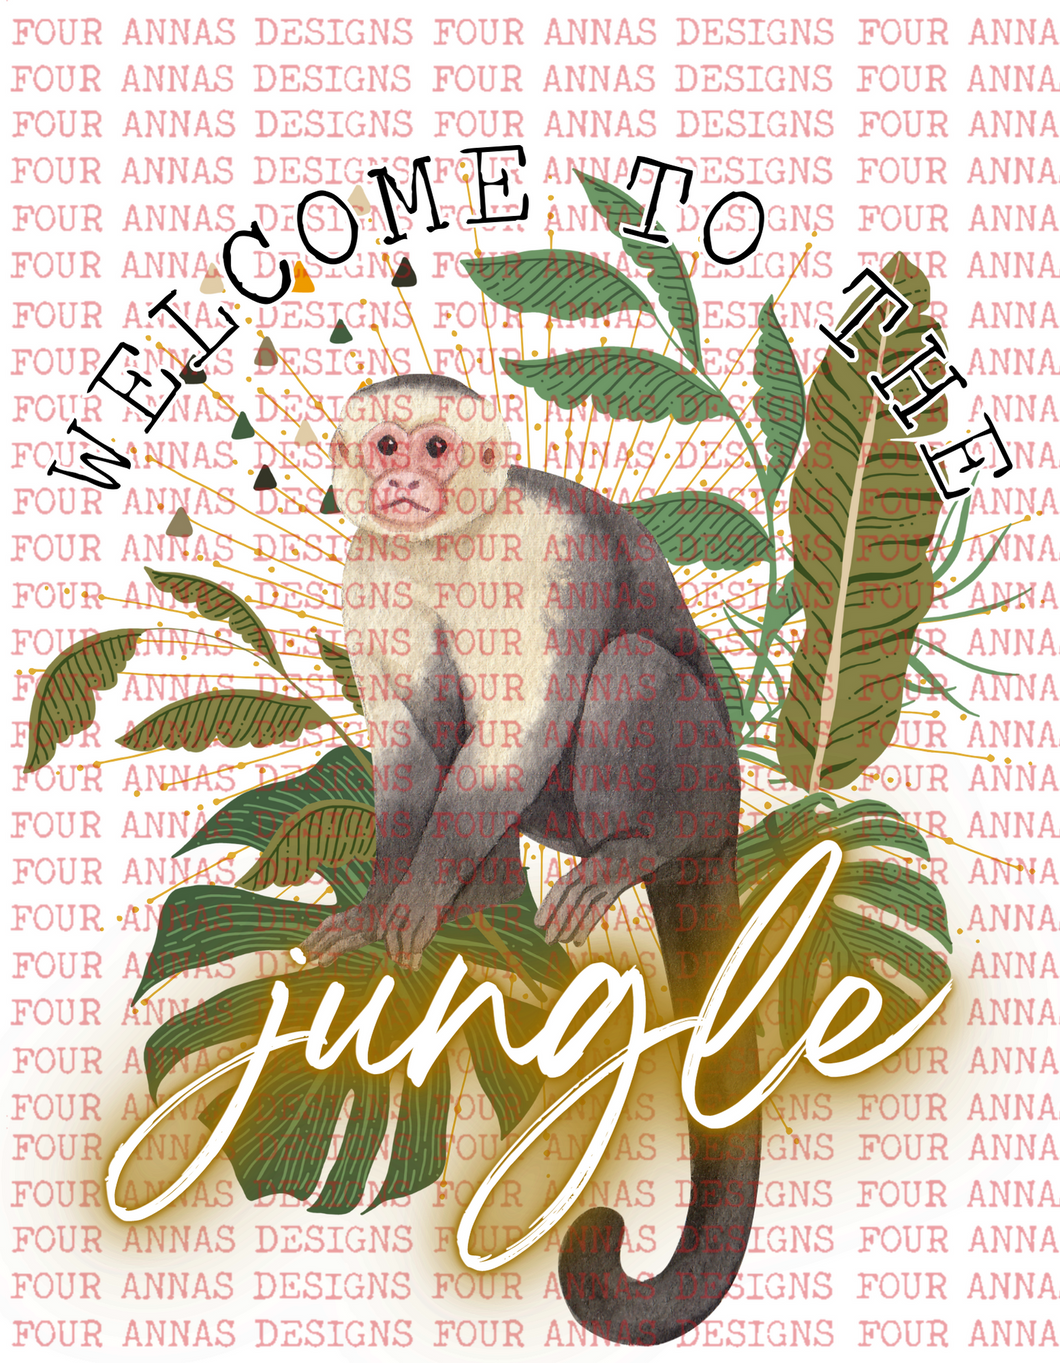 Welcome to the jungle monkey